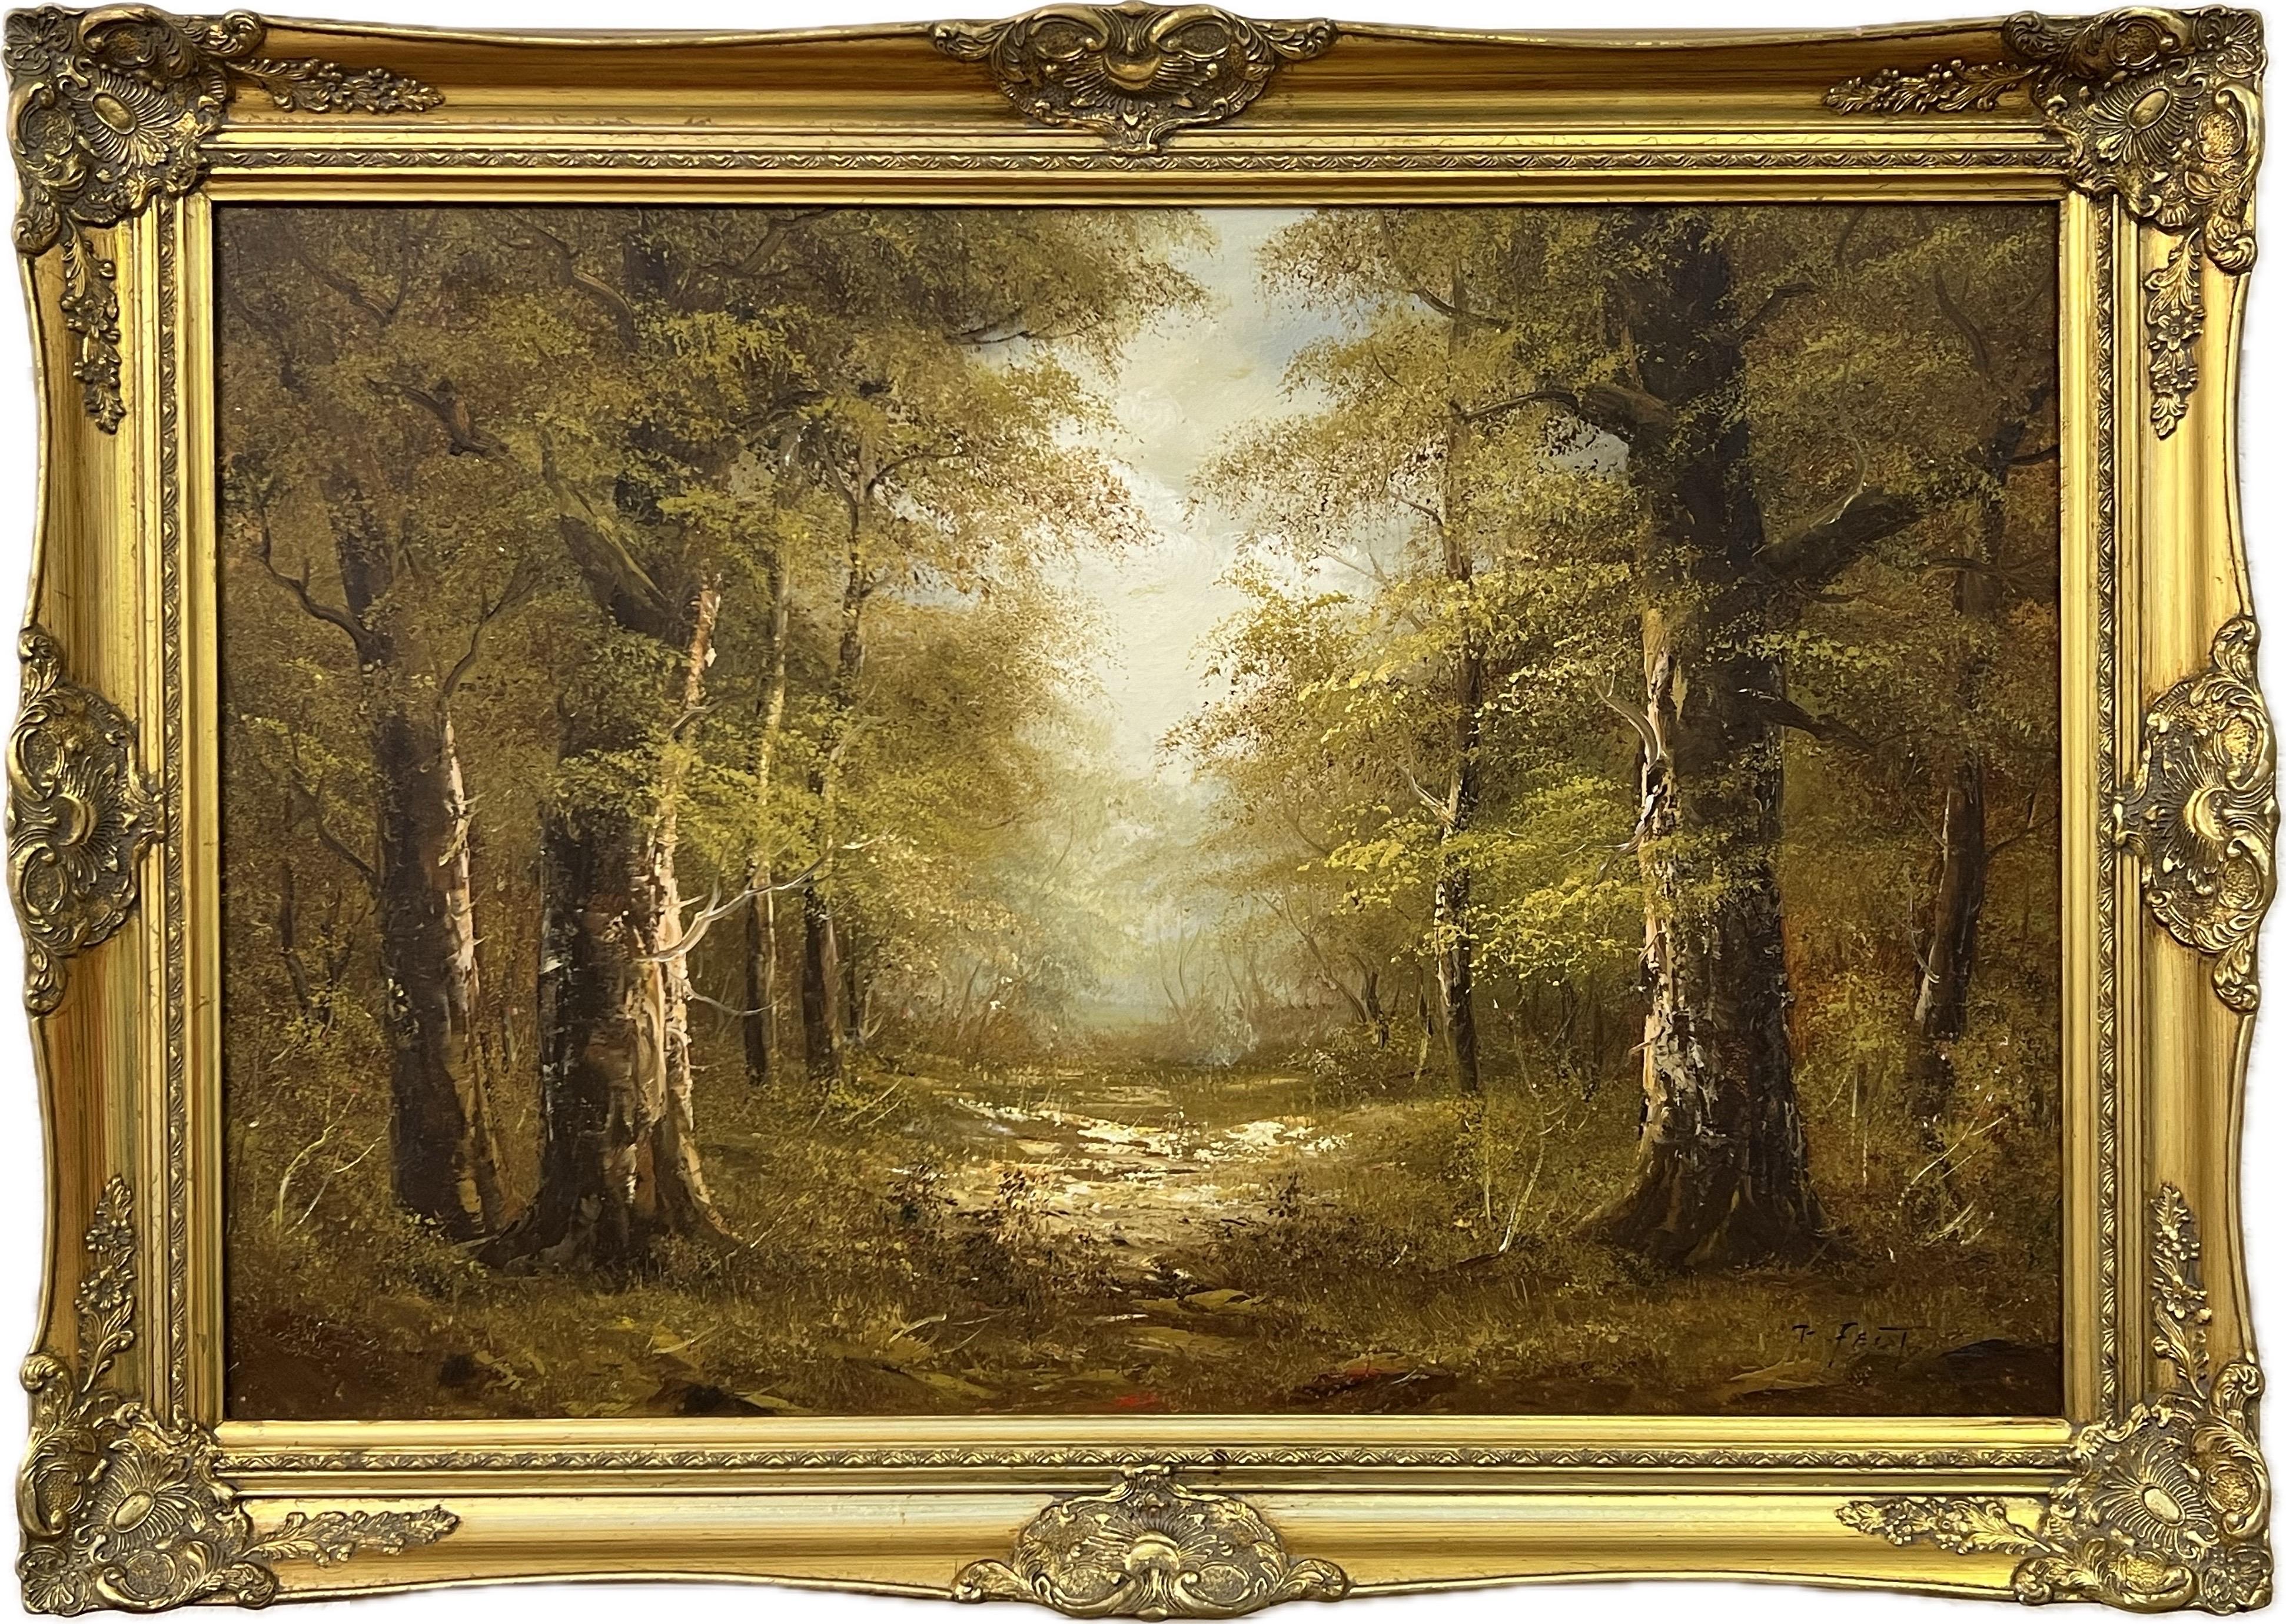 Atmospheric Impressionistic Painting of a Dense Forest in European Woodland